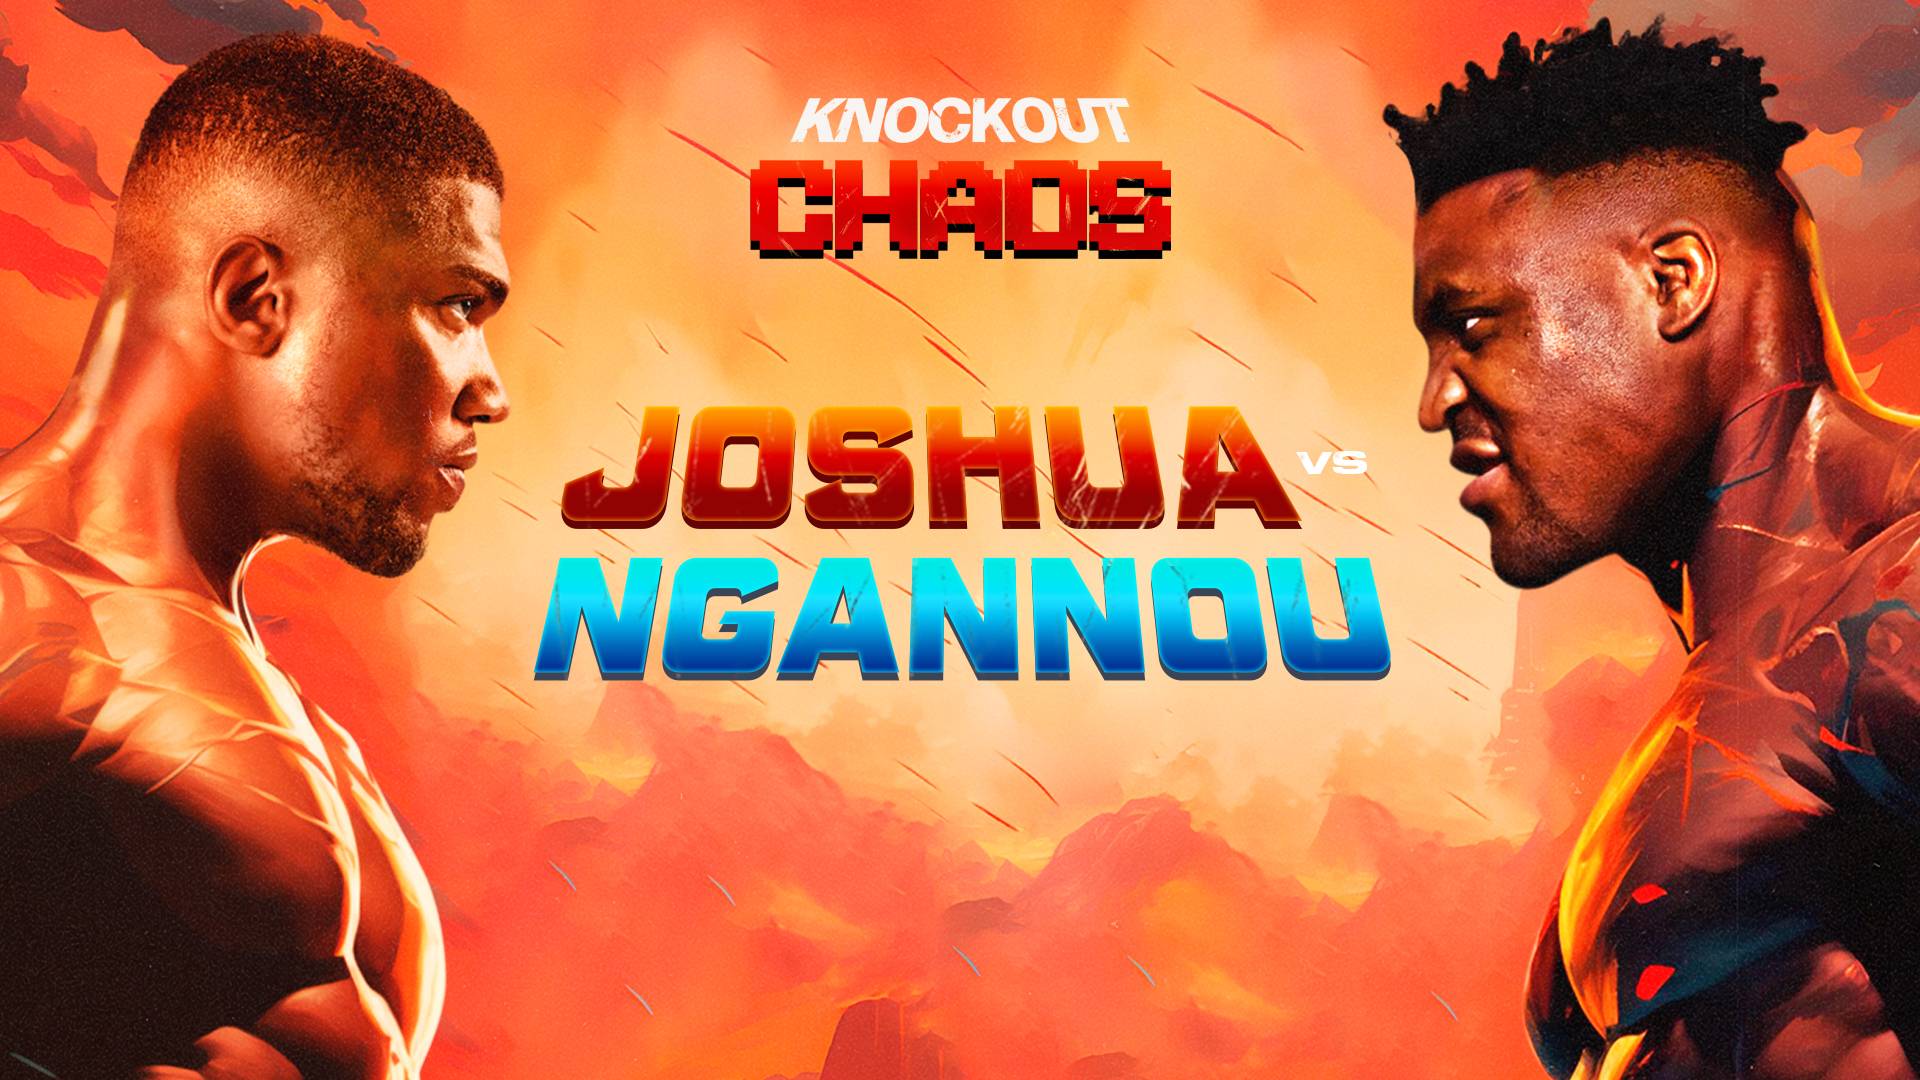 Joshua vs Ngannou LIVE stream, start time, PPV prices, how to watch